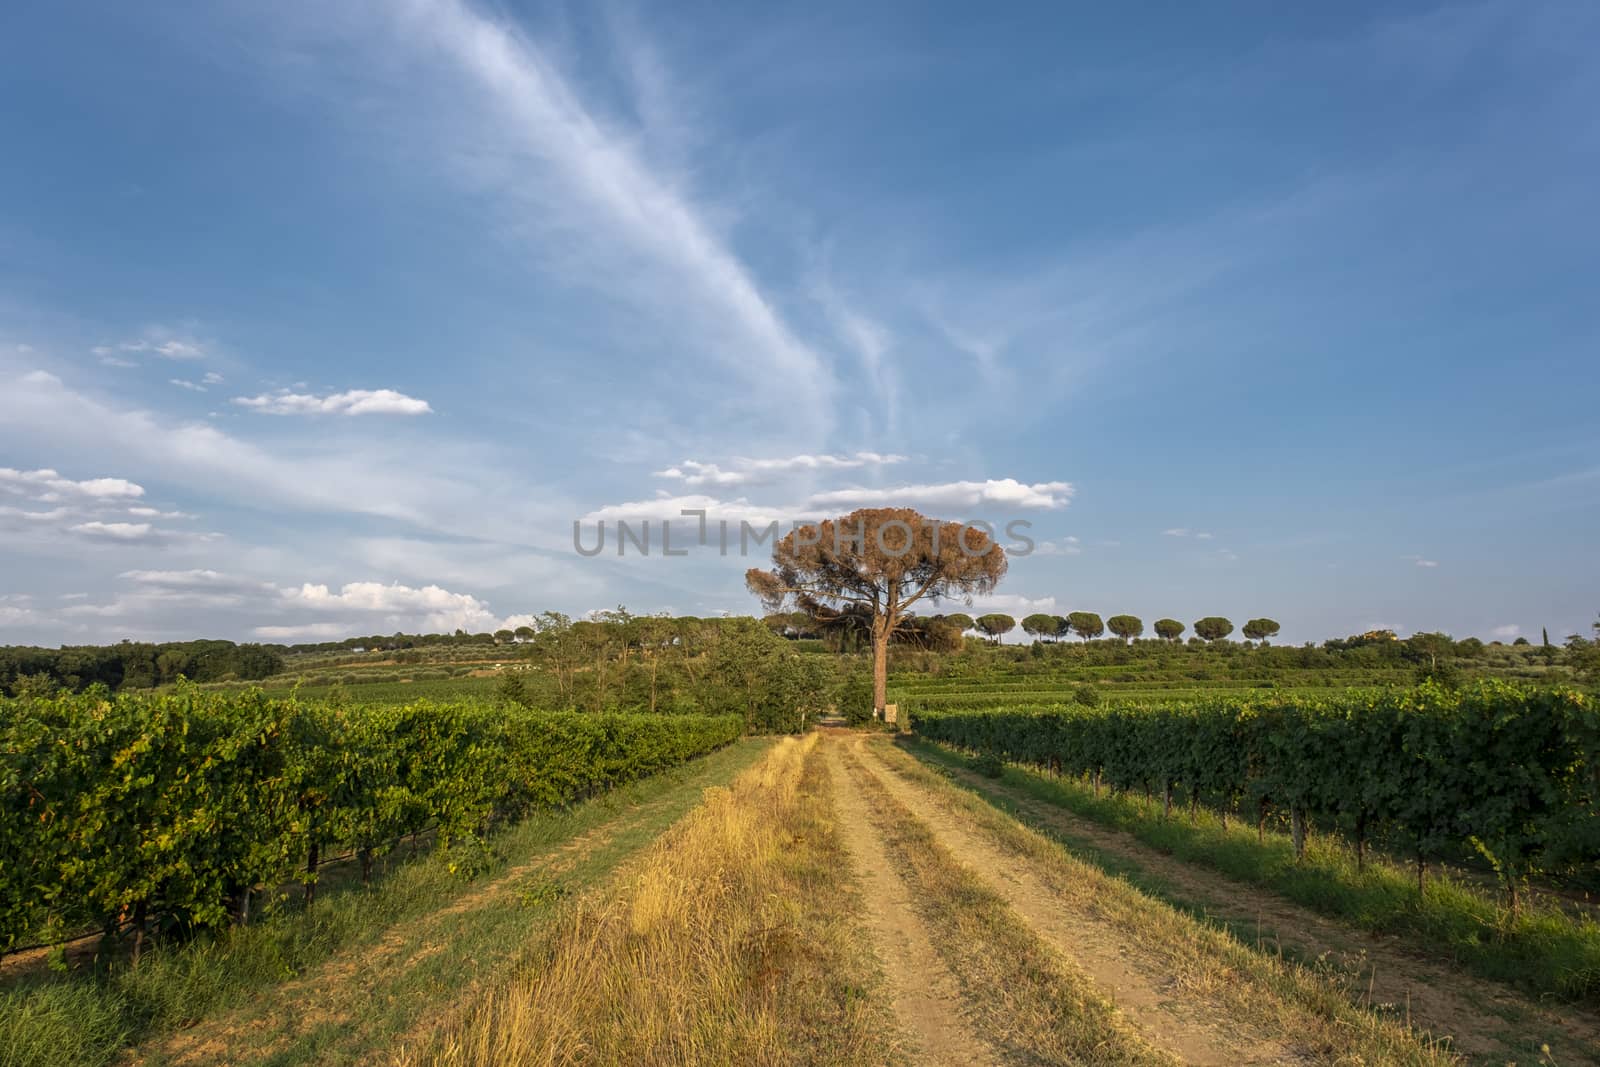 Typical Tuscan landscape with beautiful vineyards in Italy